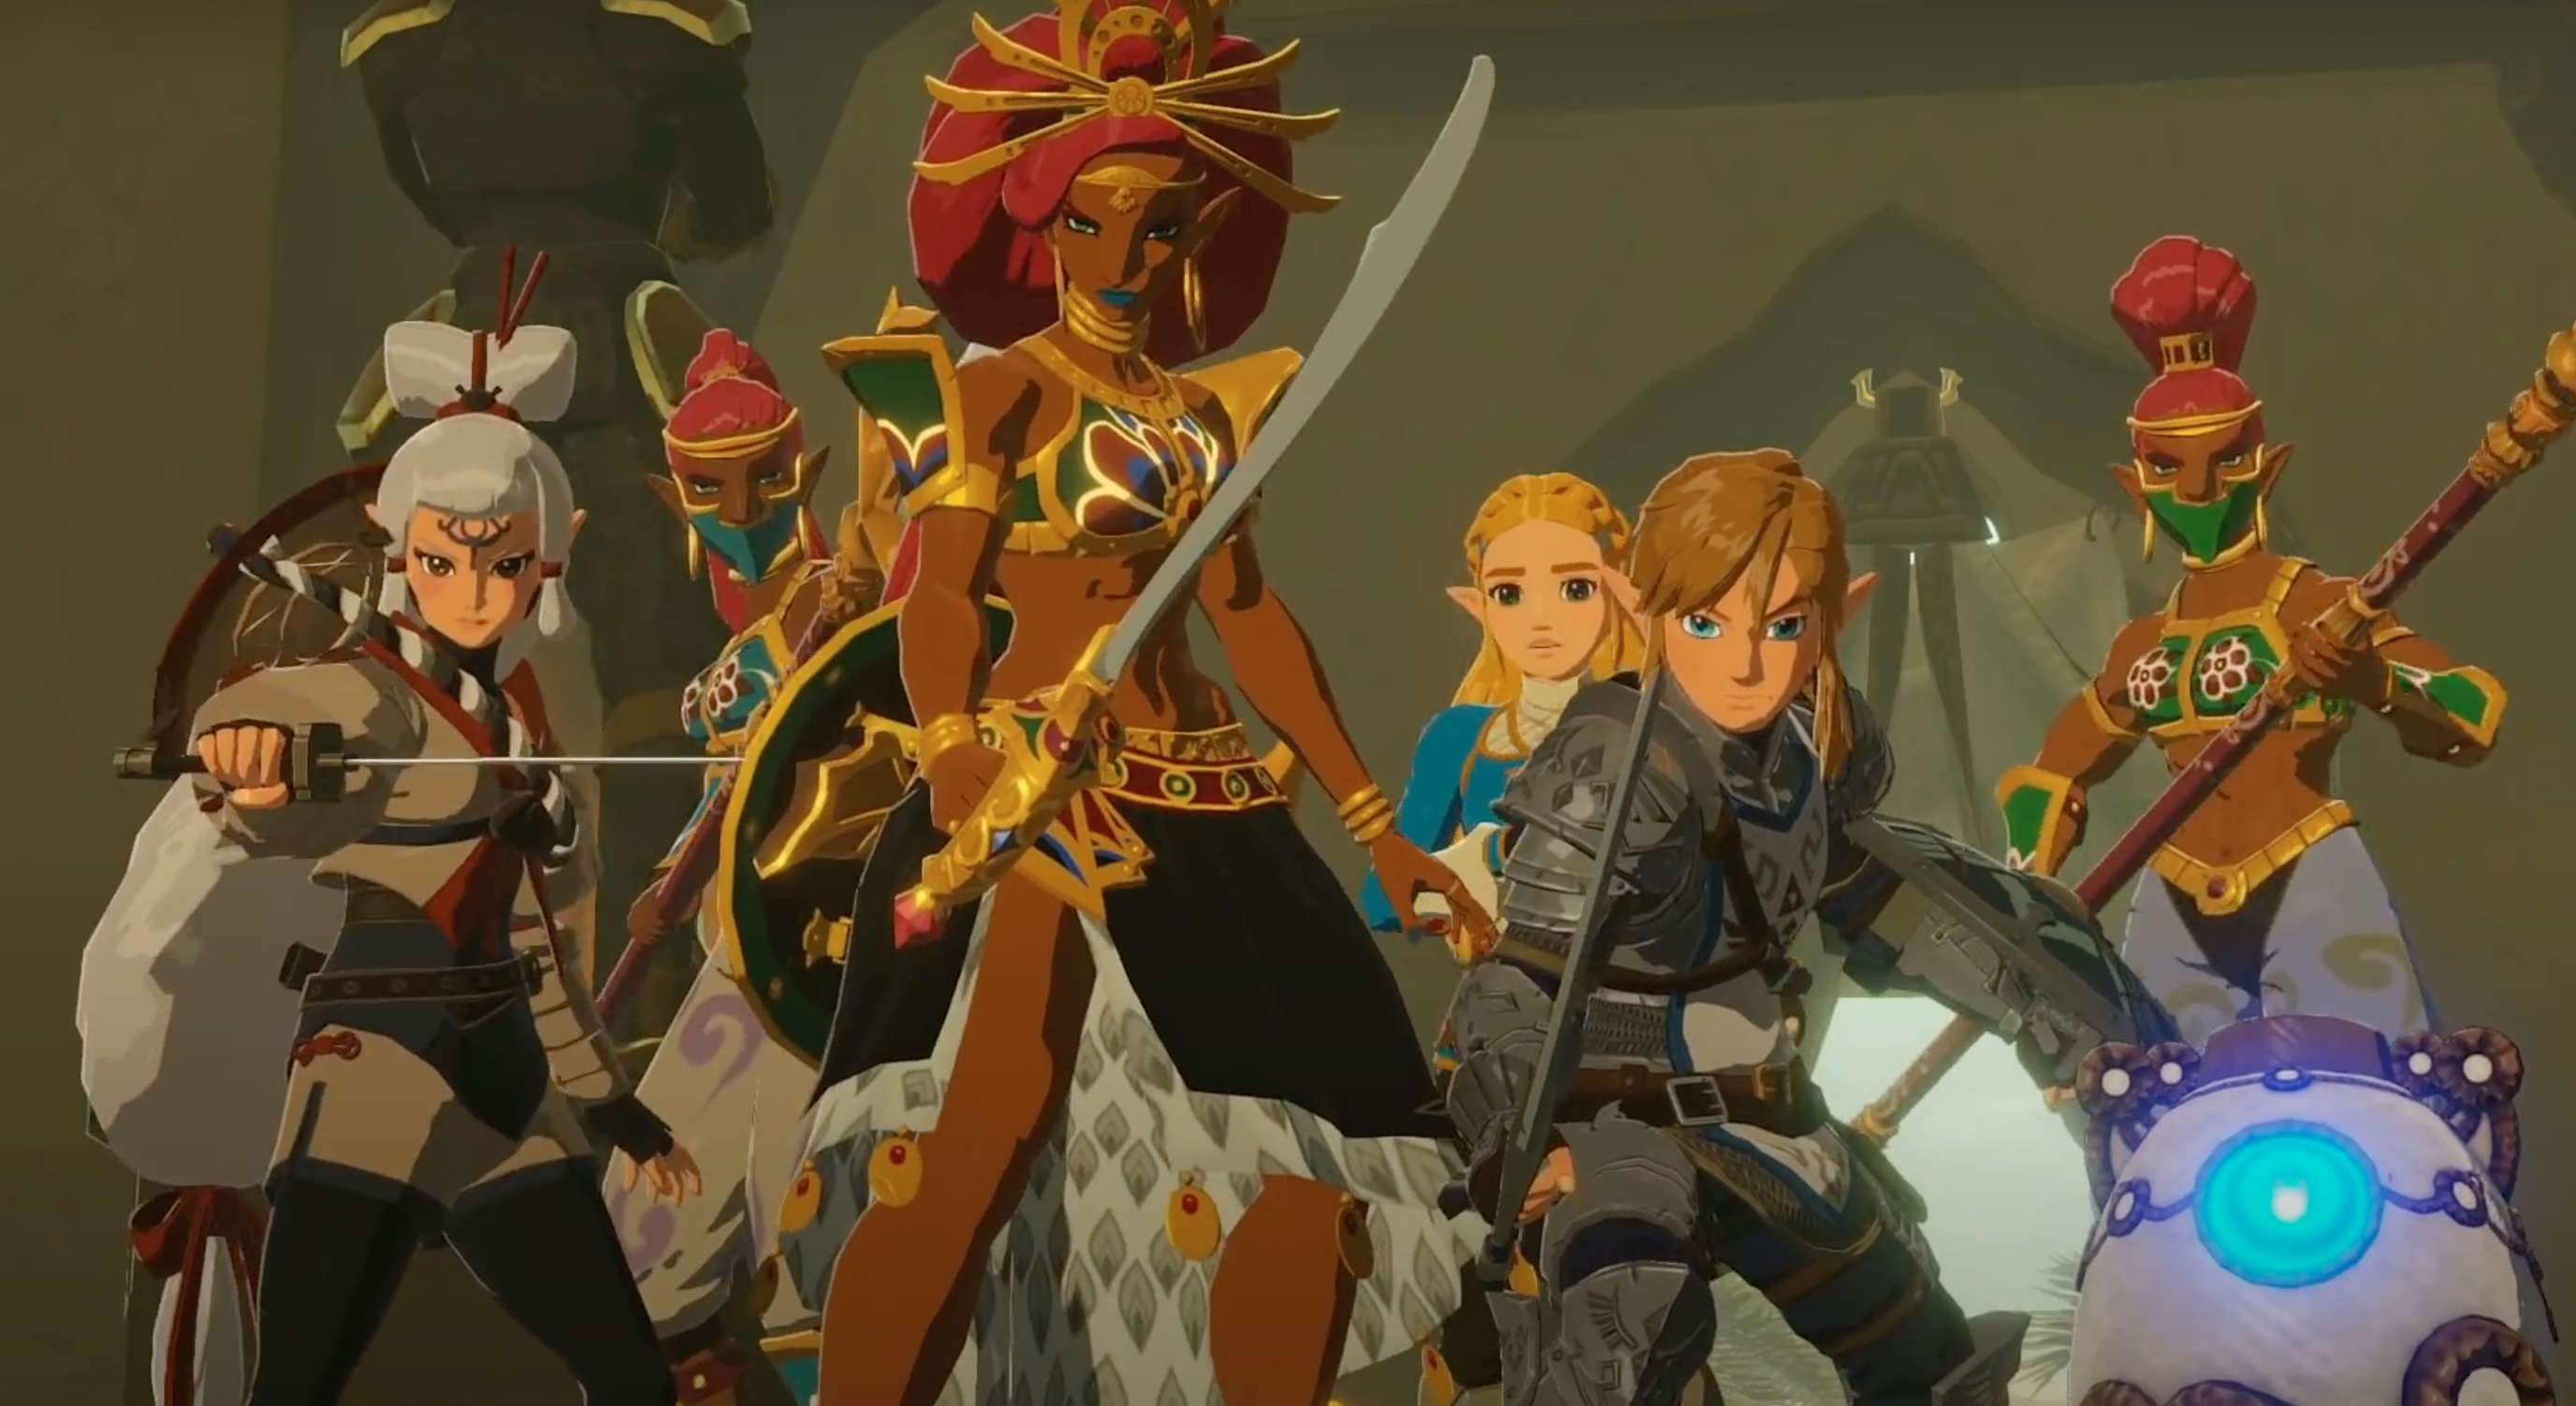 BOTW 2 - Could Nintendo Offer Zelda as a Playable Character?